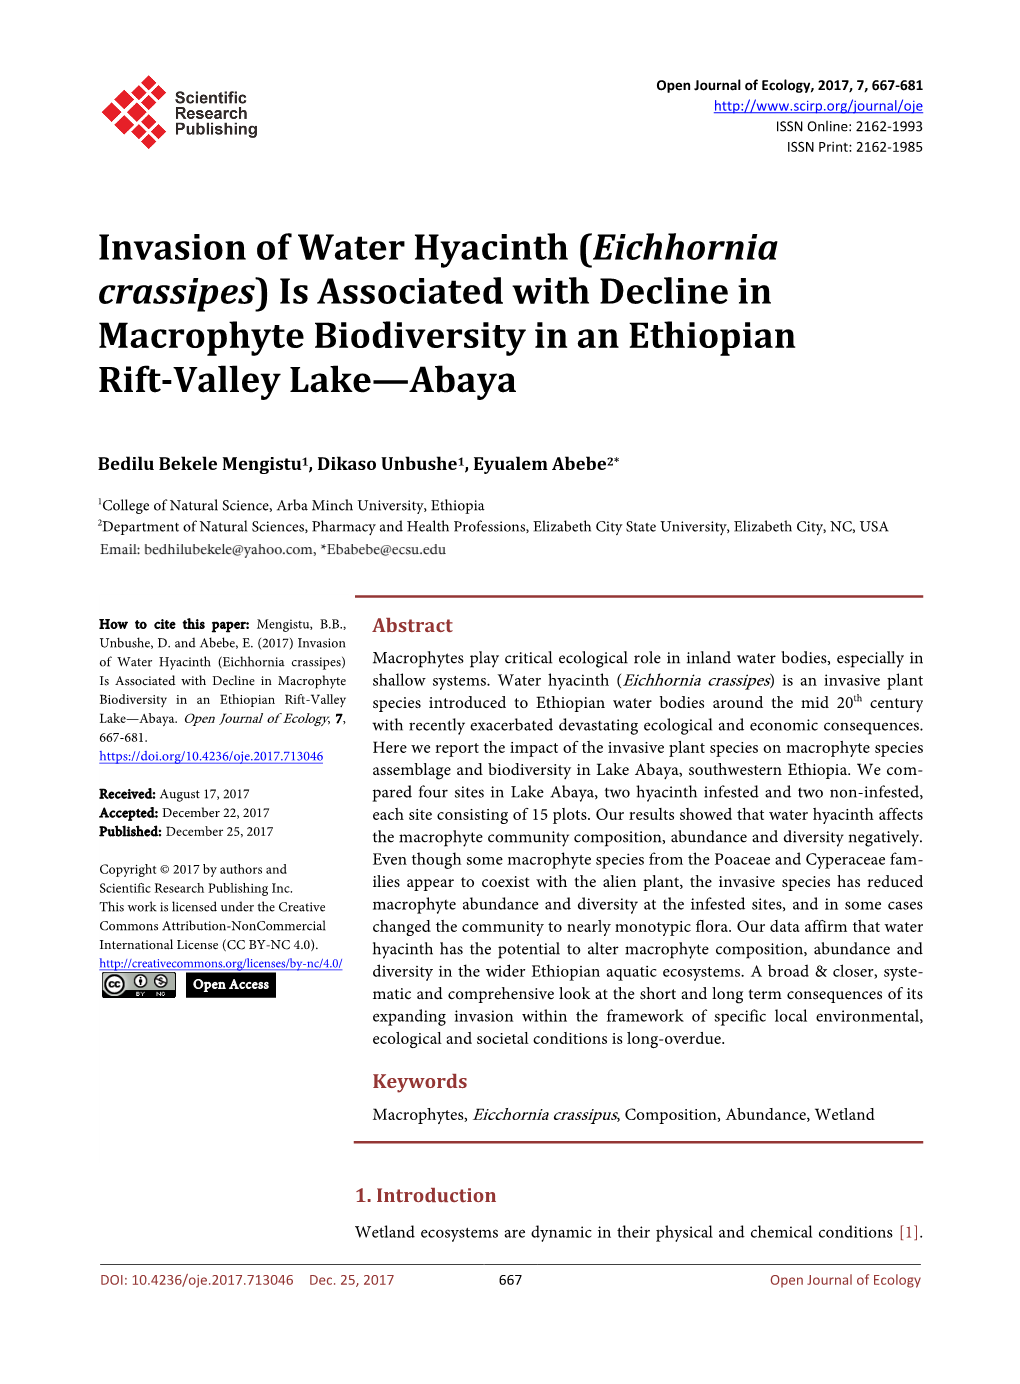 Invasion of Water Hyacinth (Eichhornia Crassipes) Is Associated with Decline in Macrophyte Biodiversity in an Ethiopian Rift-Valley Lake—Abaya